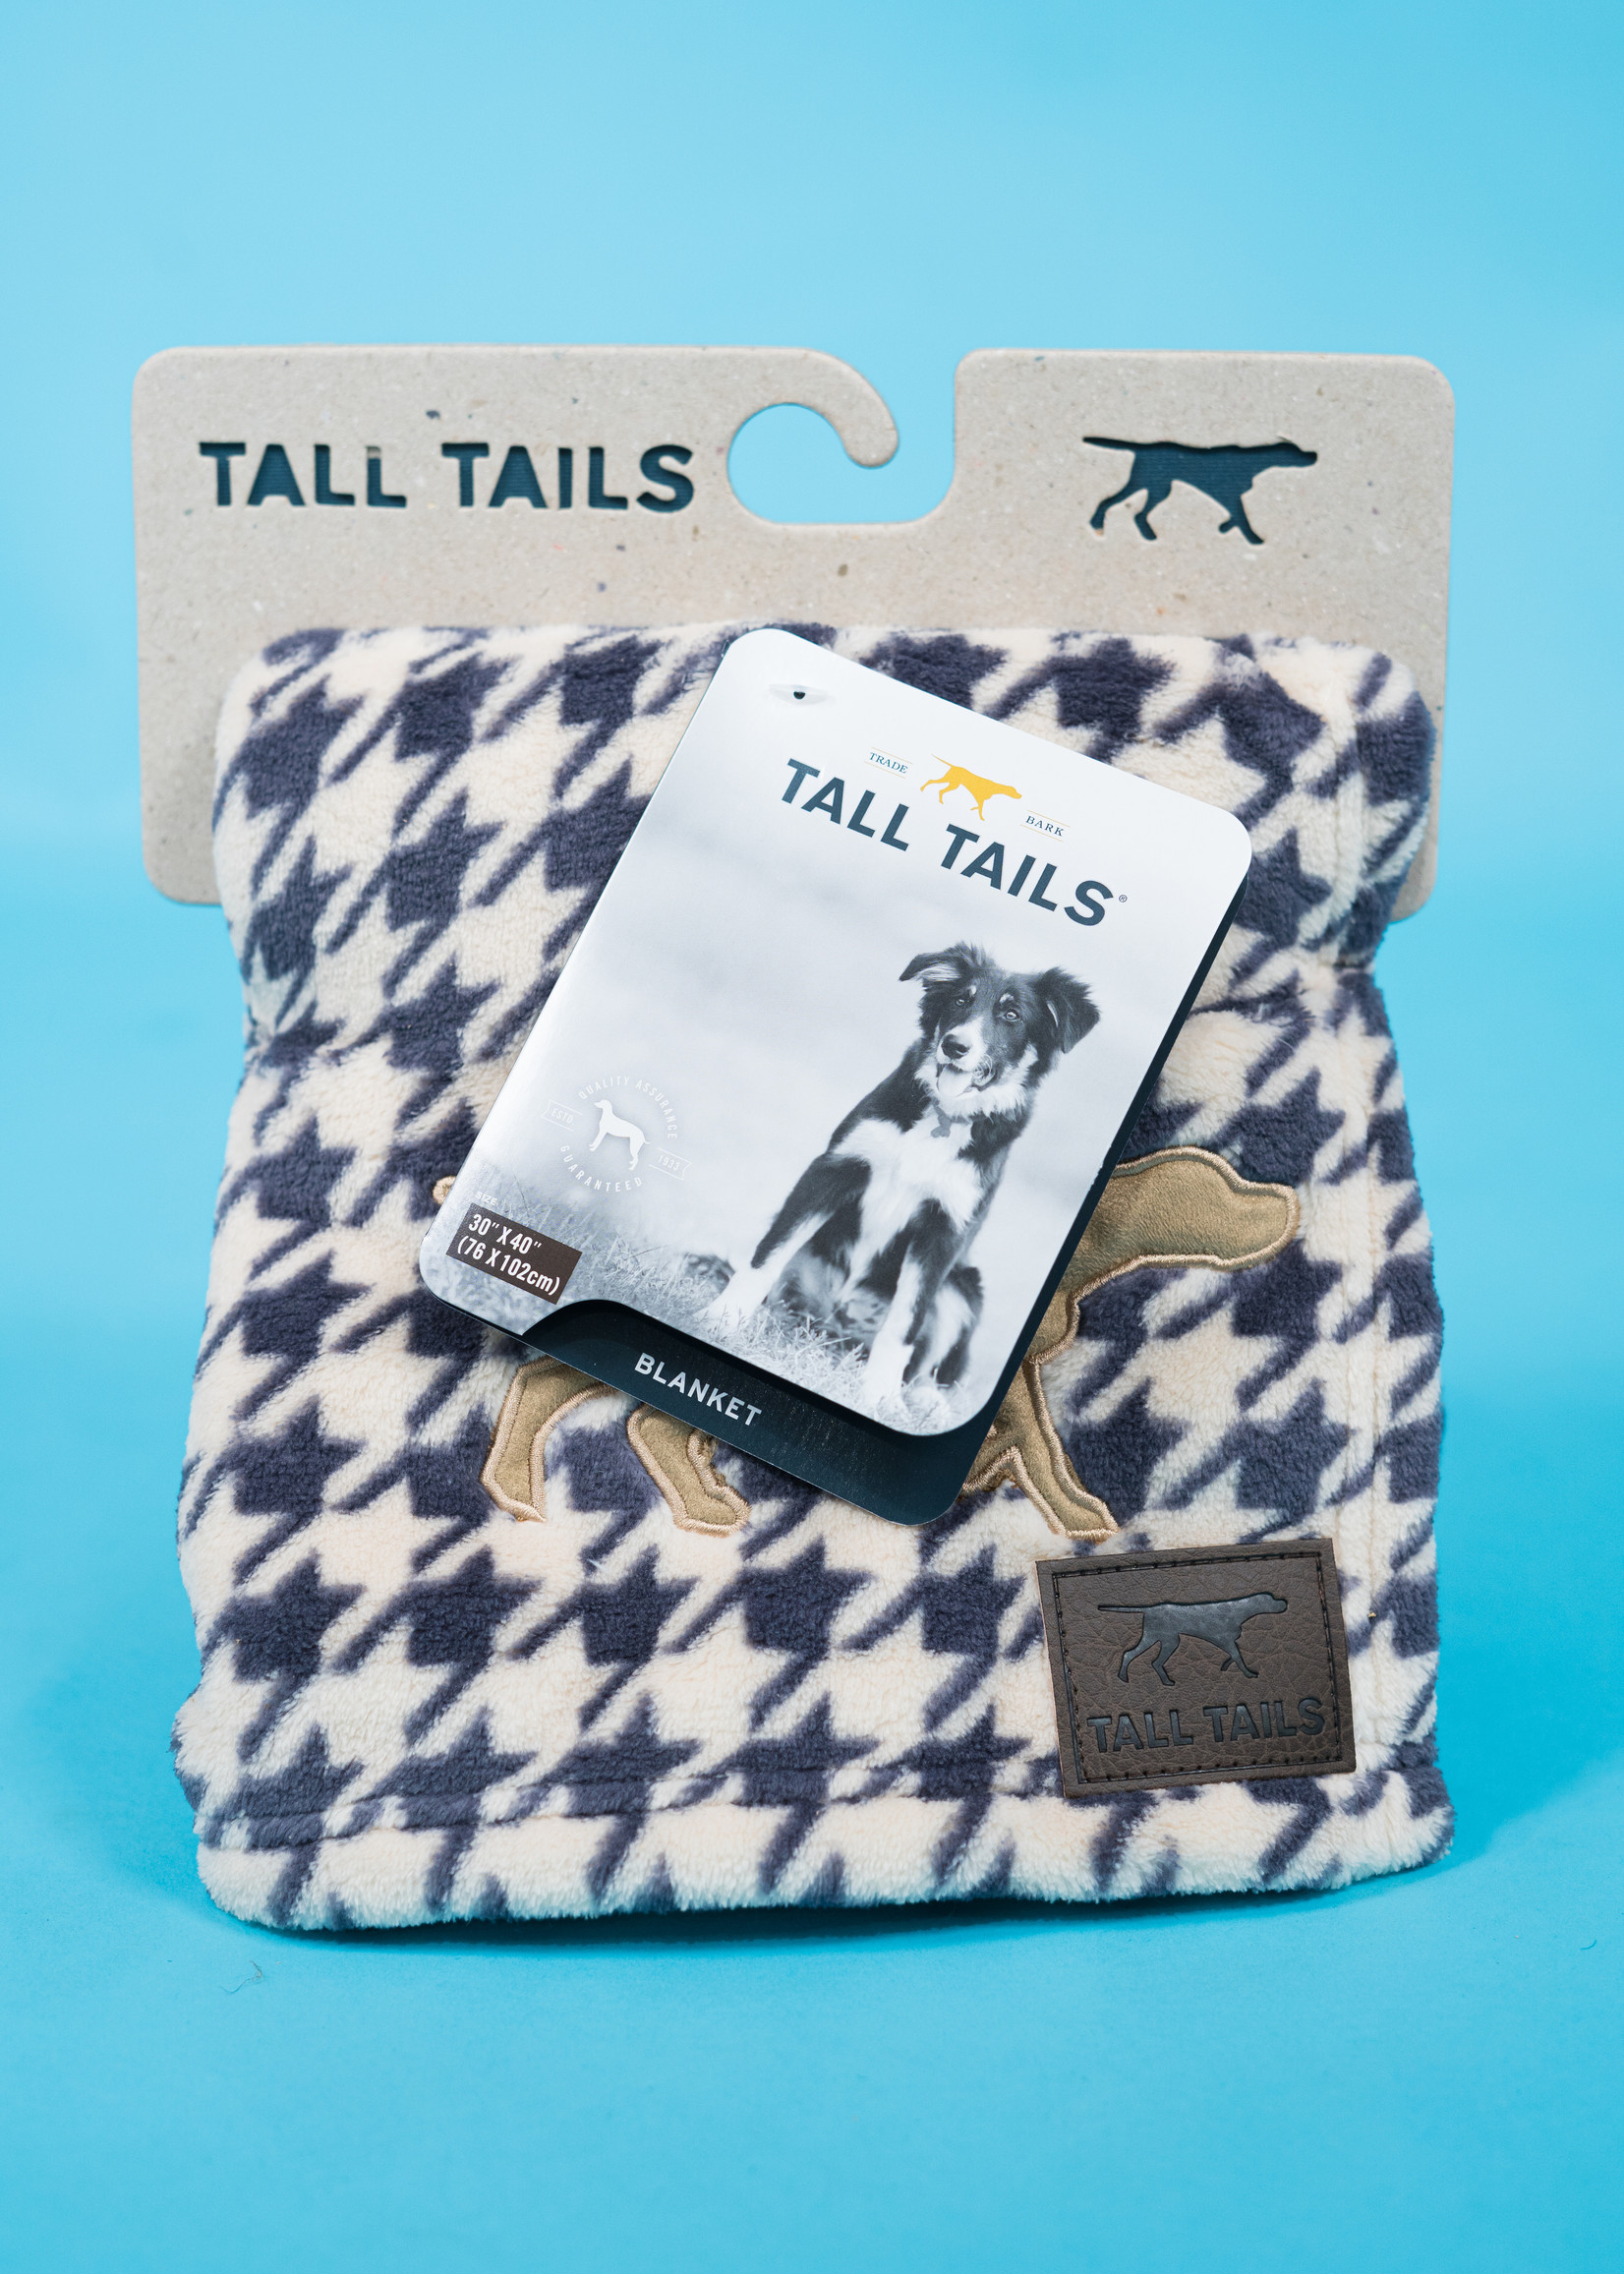 Tall Tails Tall Tails Blanket Hounds Tooth 30" x 40"